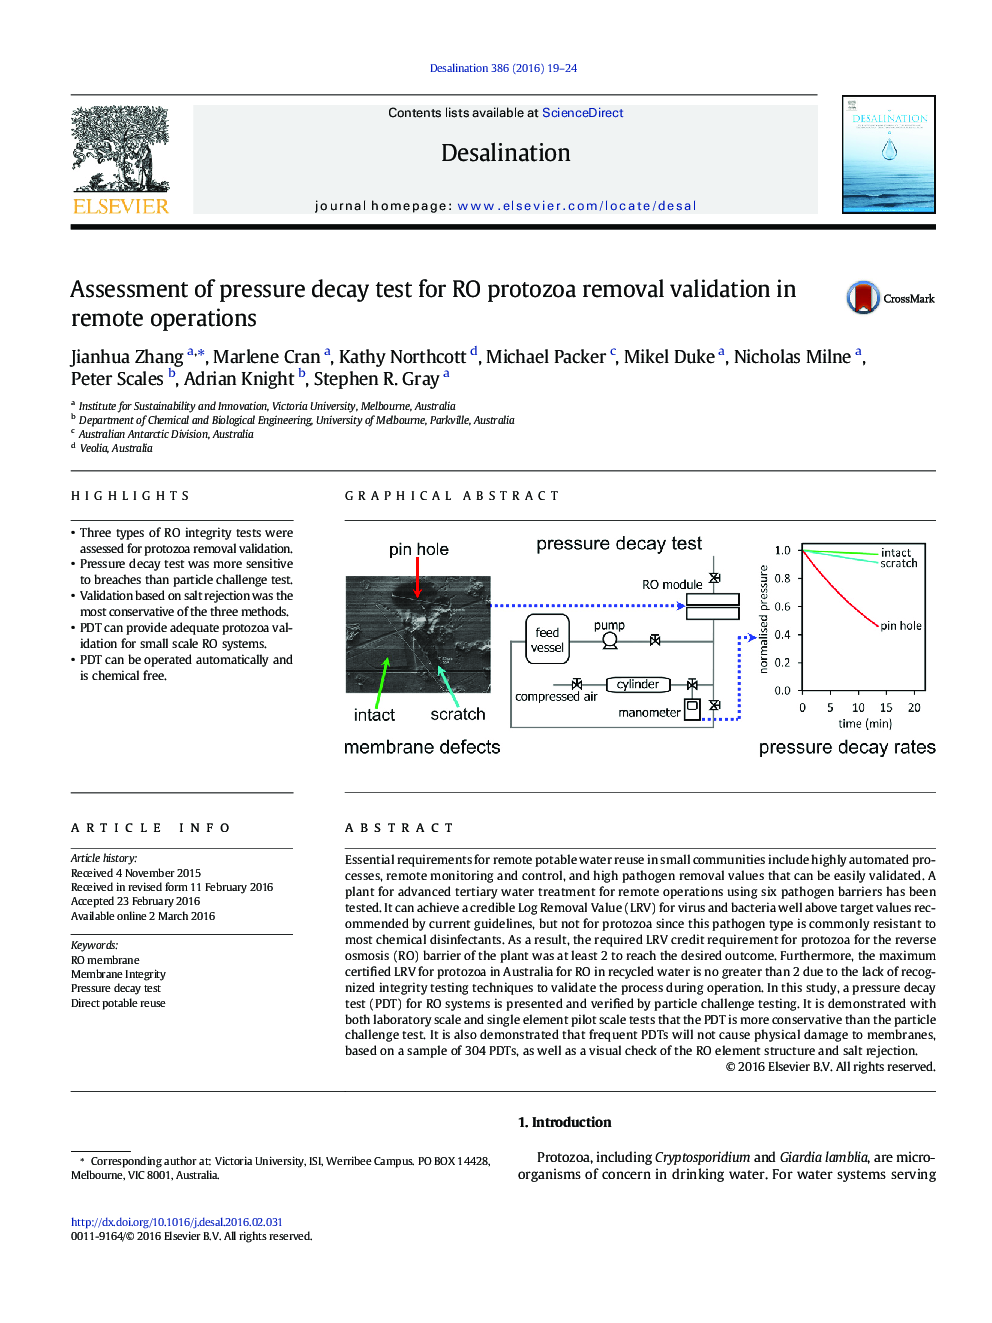 Assessment of pressure decay test for RO protozoa removal validation in remote operations